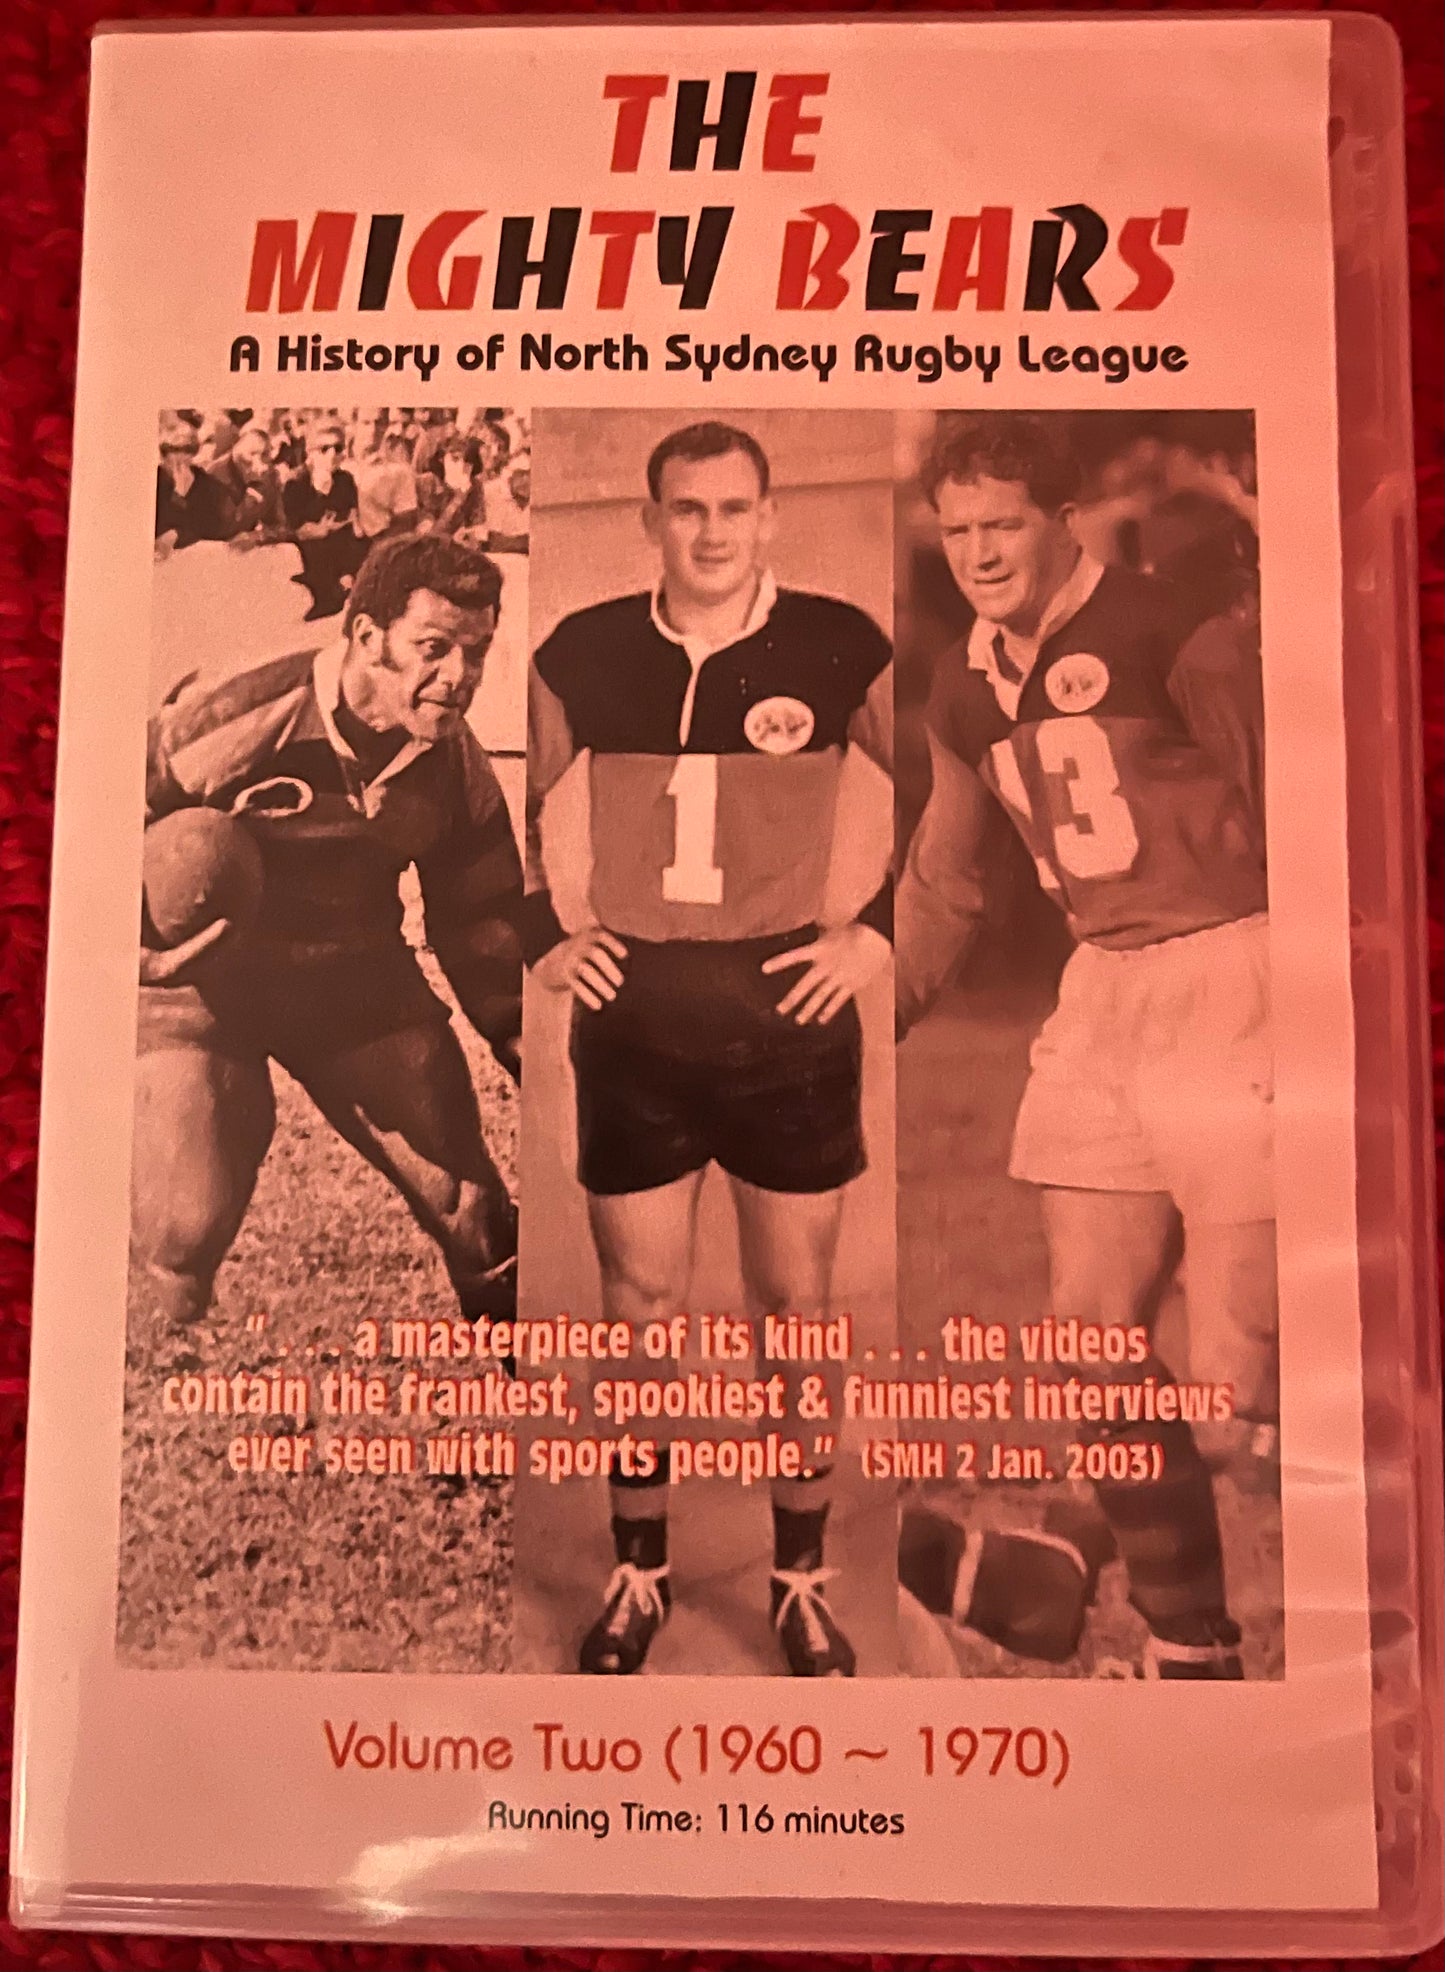 The Mighty Bears - Volume 2 (1960 - 1970)